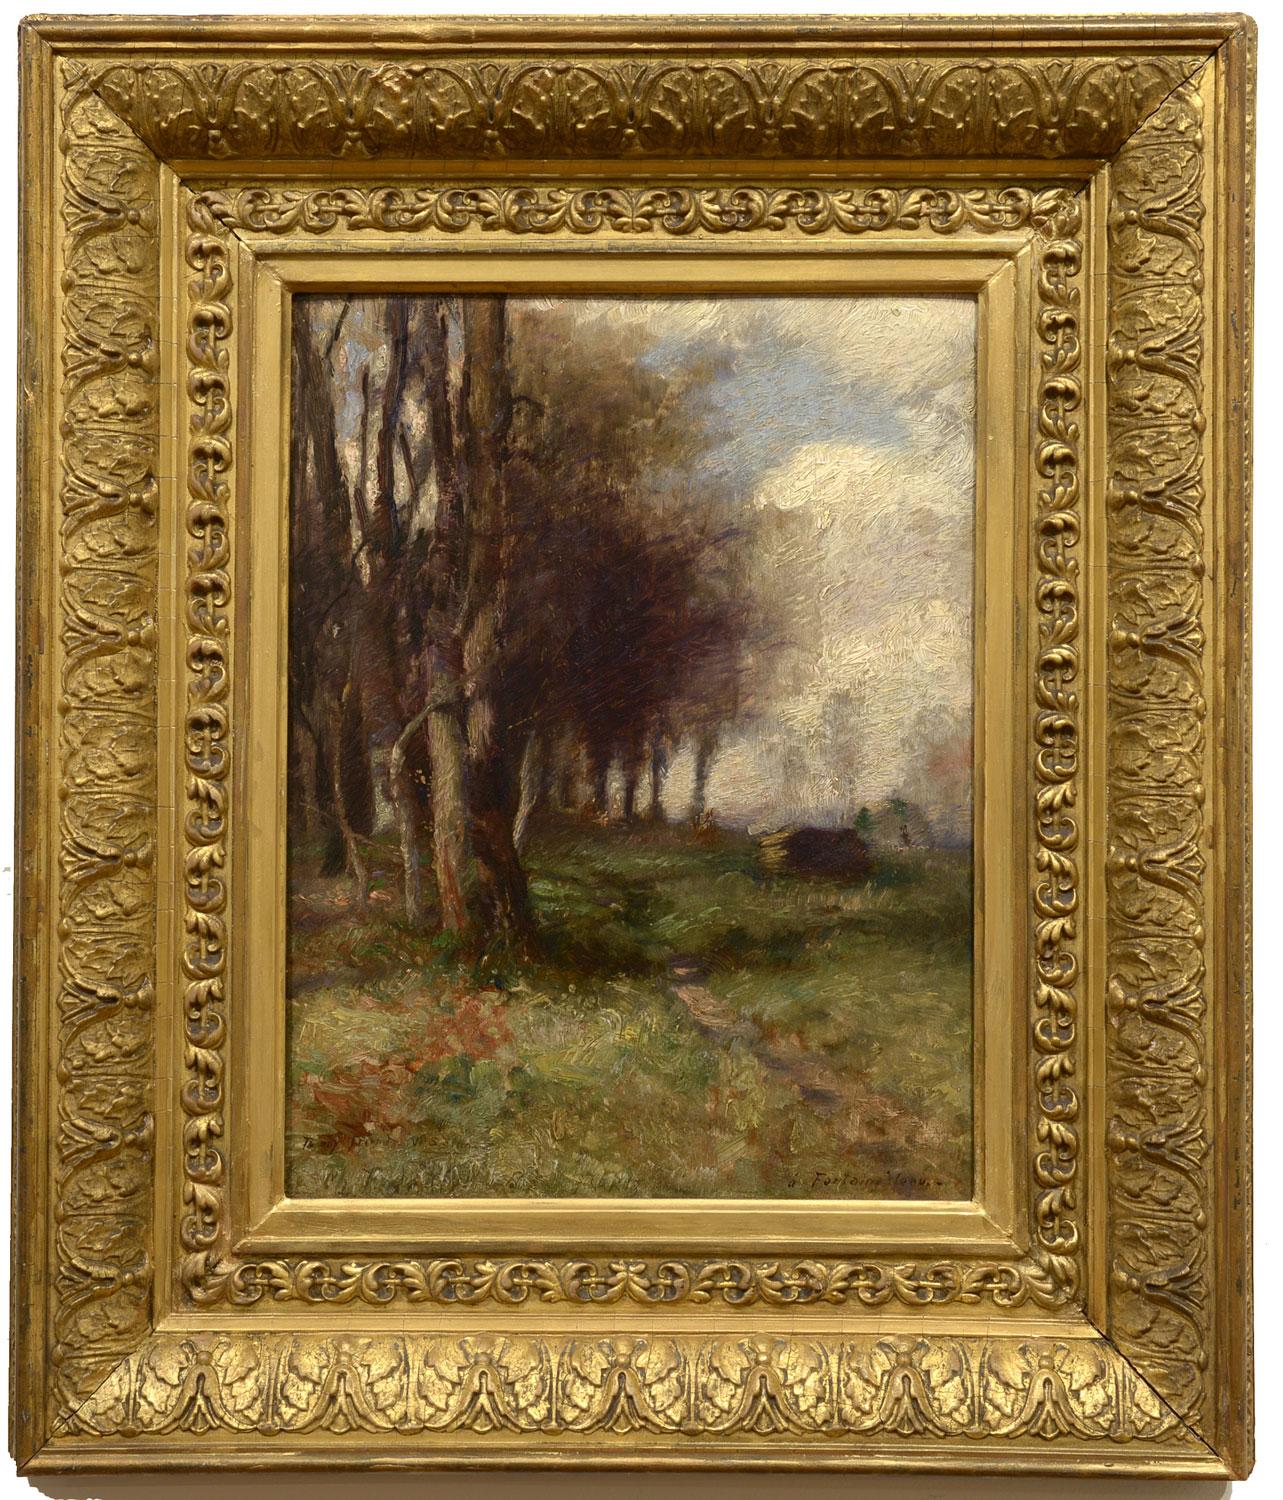 "a Fontainebleu," Charles Francis DeKlyn, Barbizon oil of the French countryside